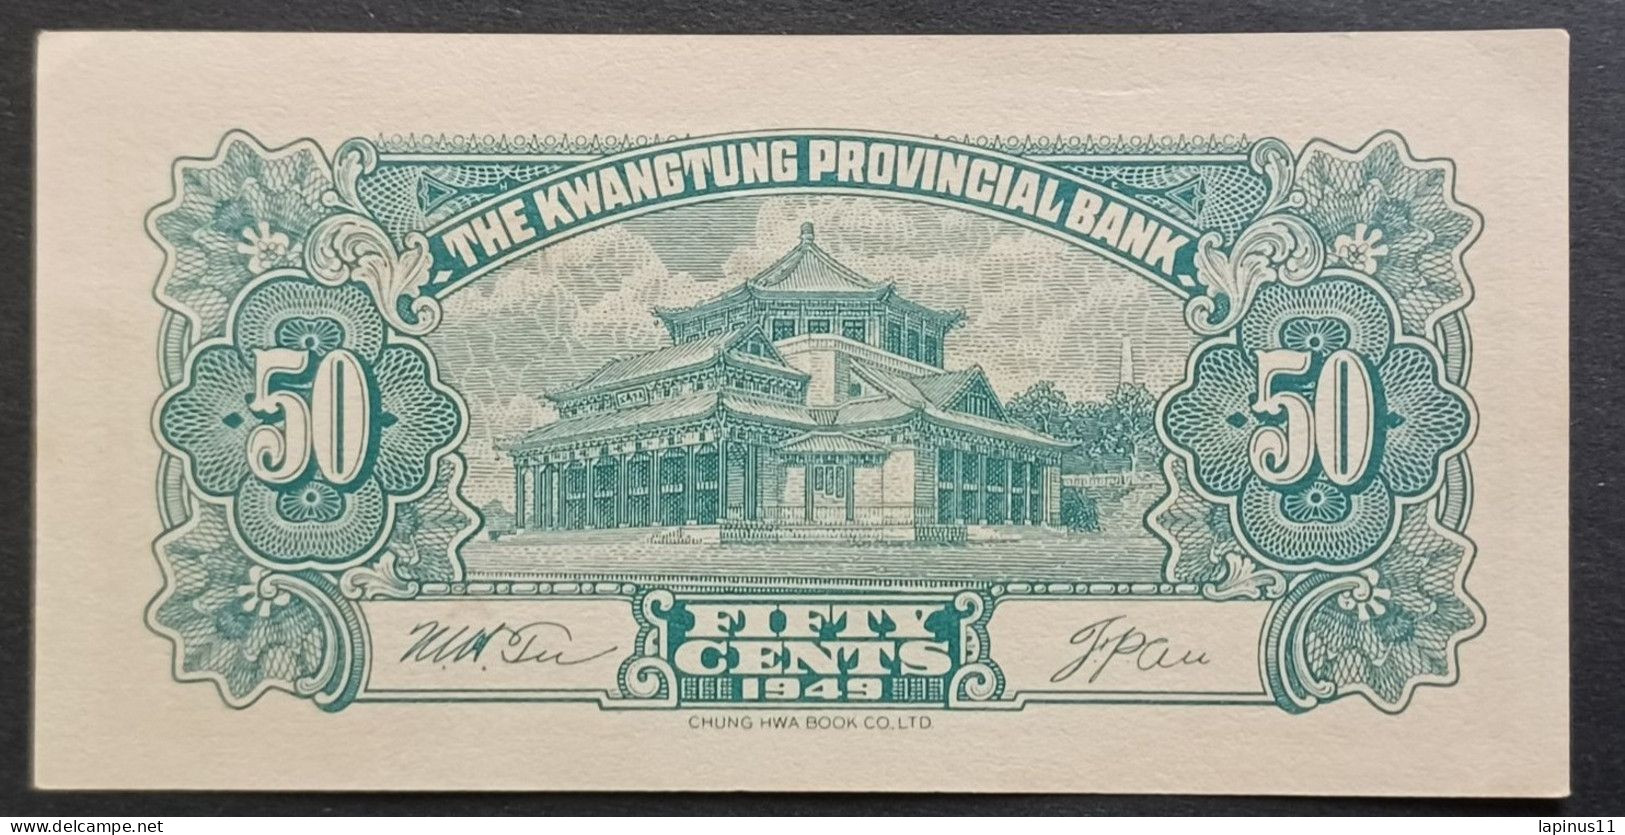 BANKNOTE CHINA KWANGTUNG PROVINCIAL 50 CENT 1949 SERIES A UNCIRCULATED - Chine